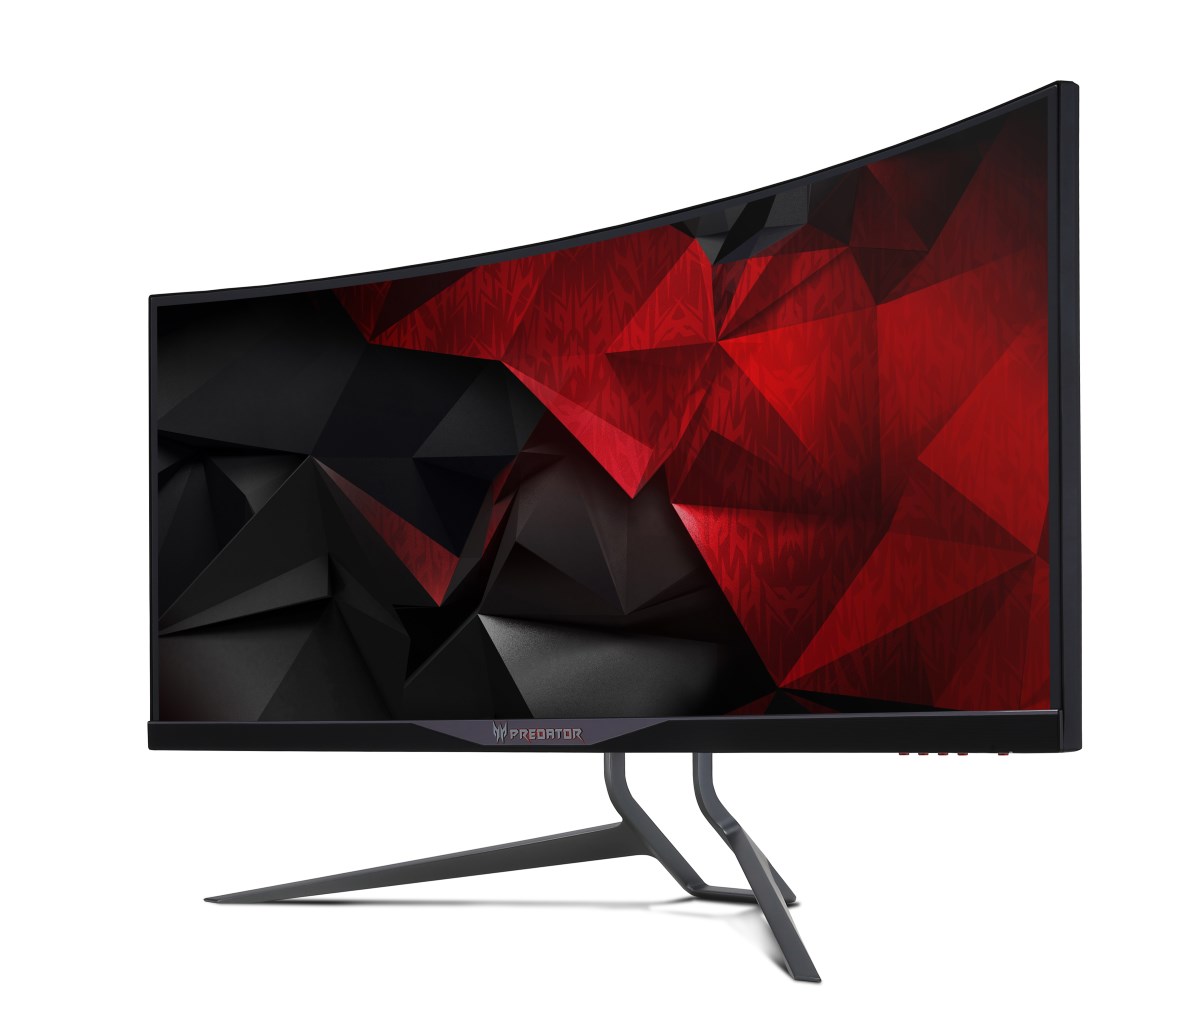 Acer Predator X34 Front View Left Angle